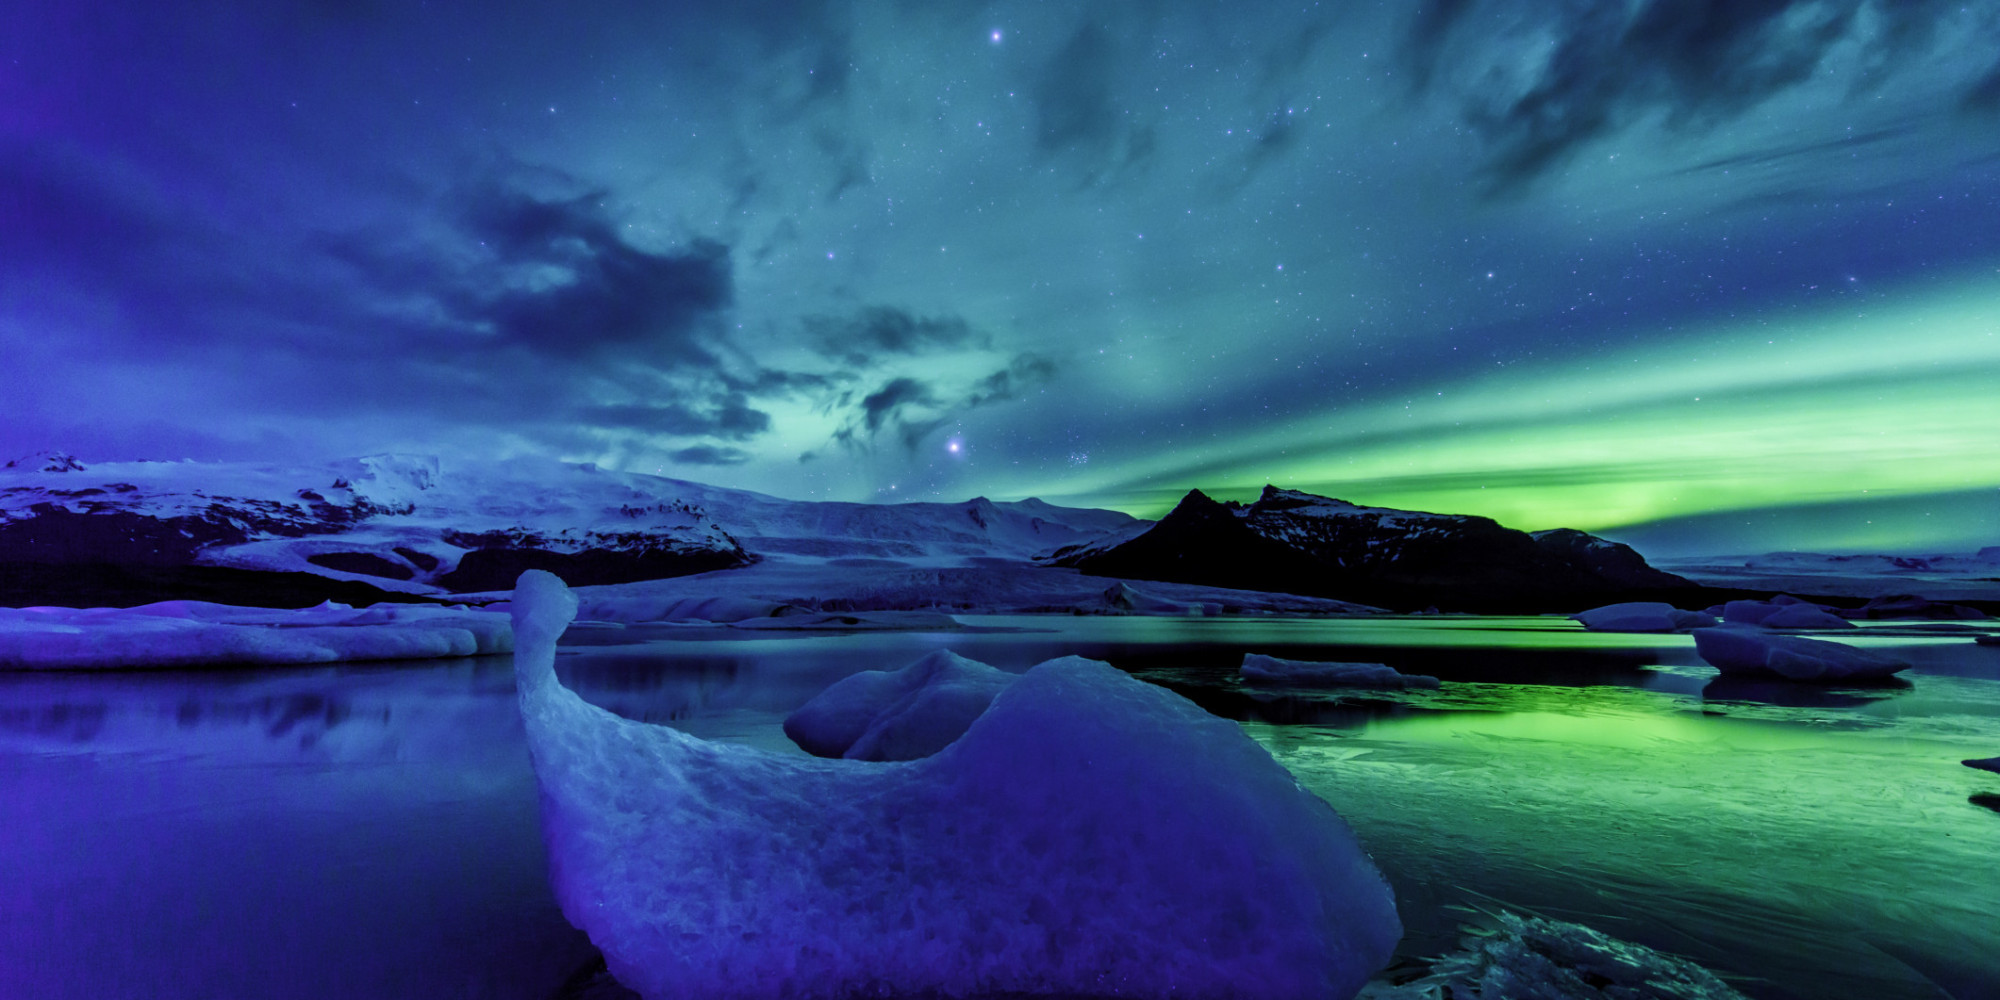 This Time-Lapse Video Makes Iceland Look Like a Science Fiction